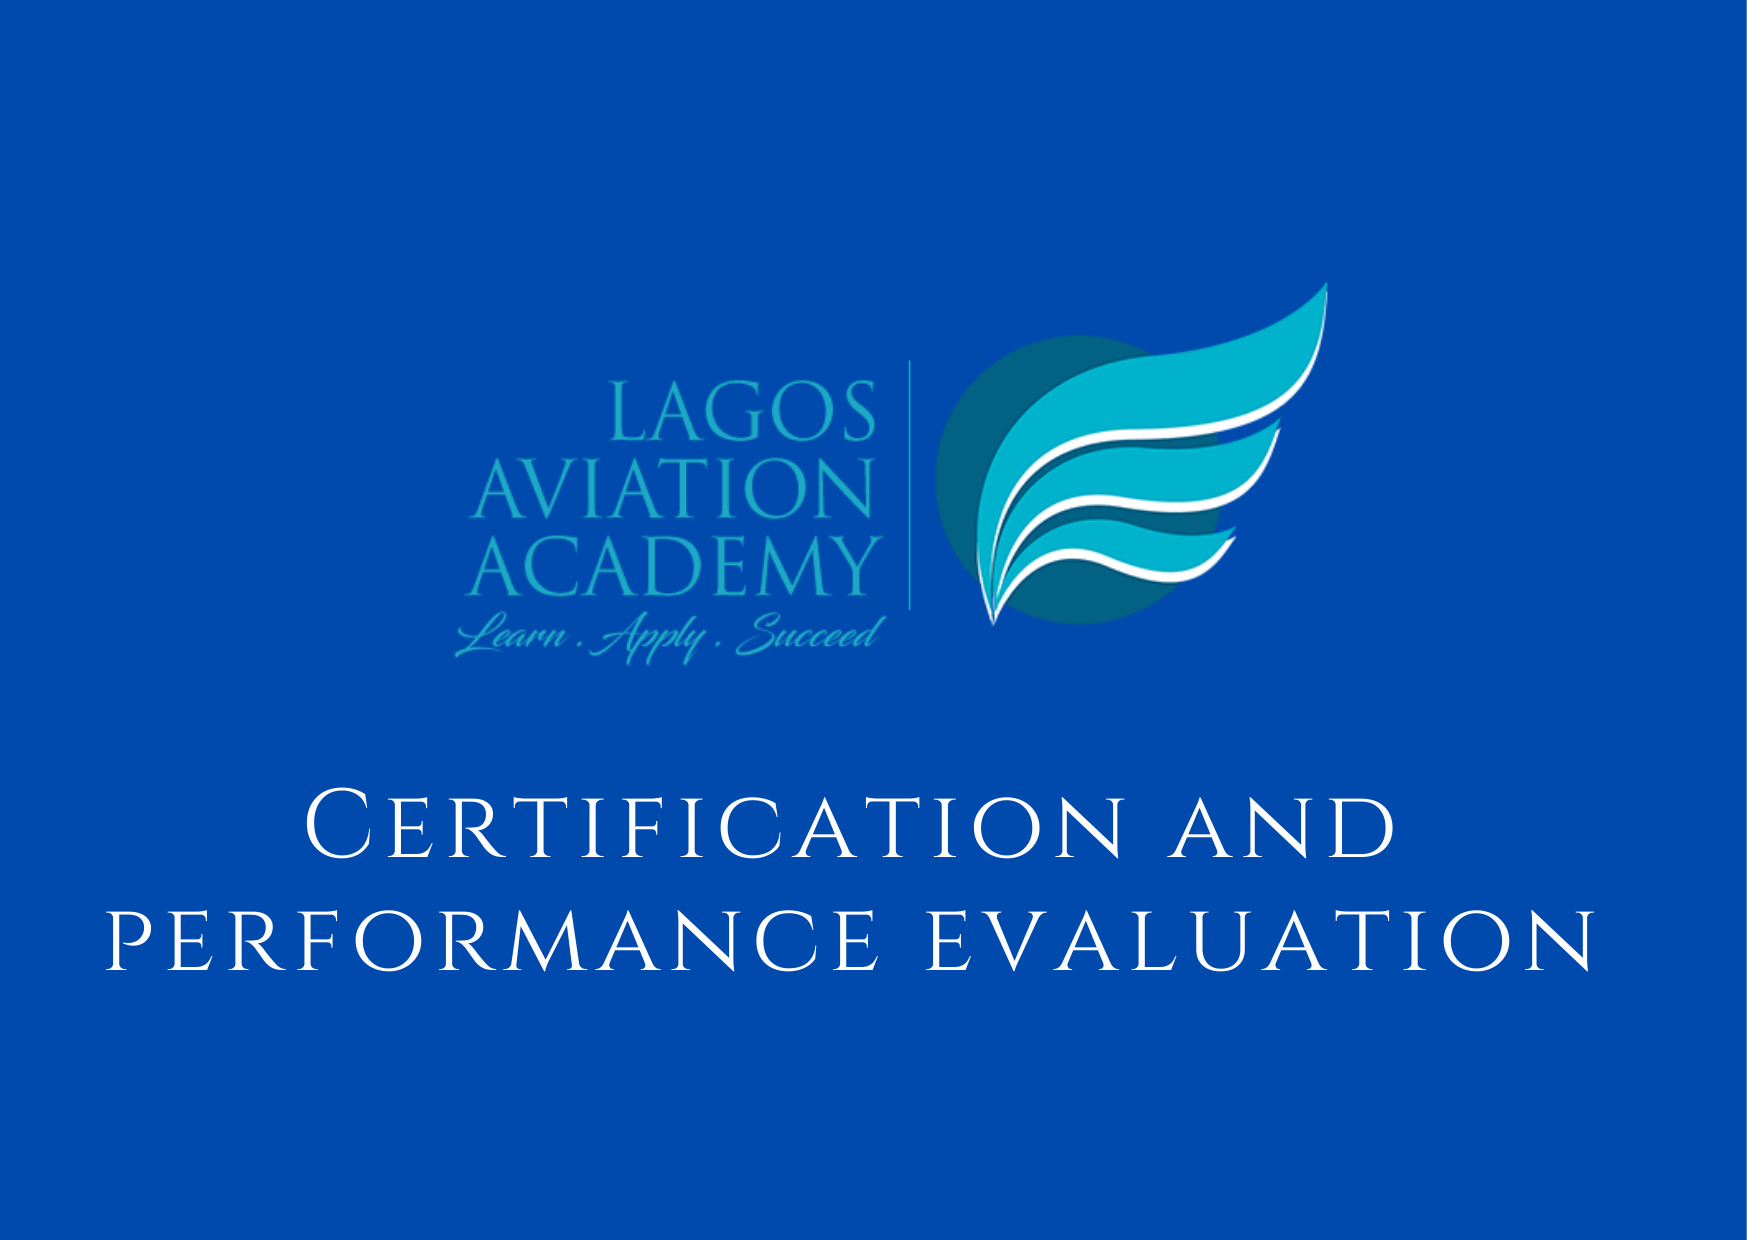 Certification and Performance Evaluation for Virtual Courses